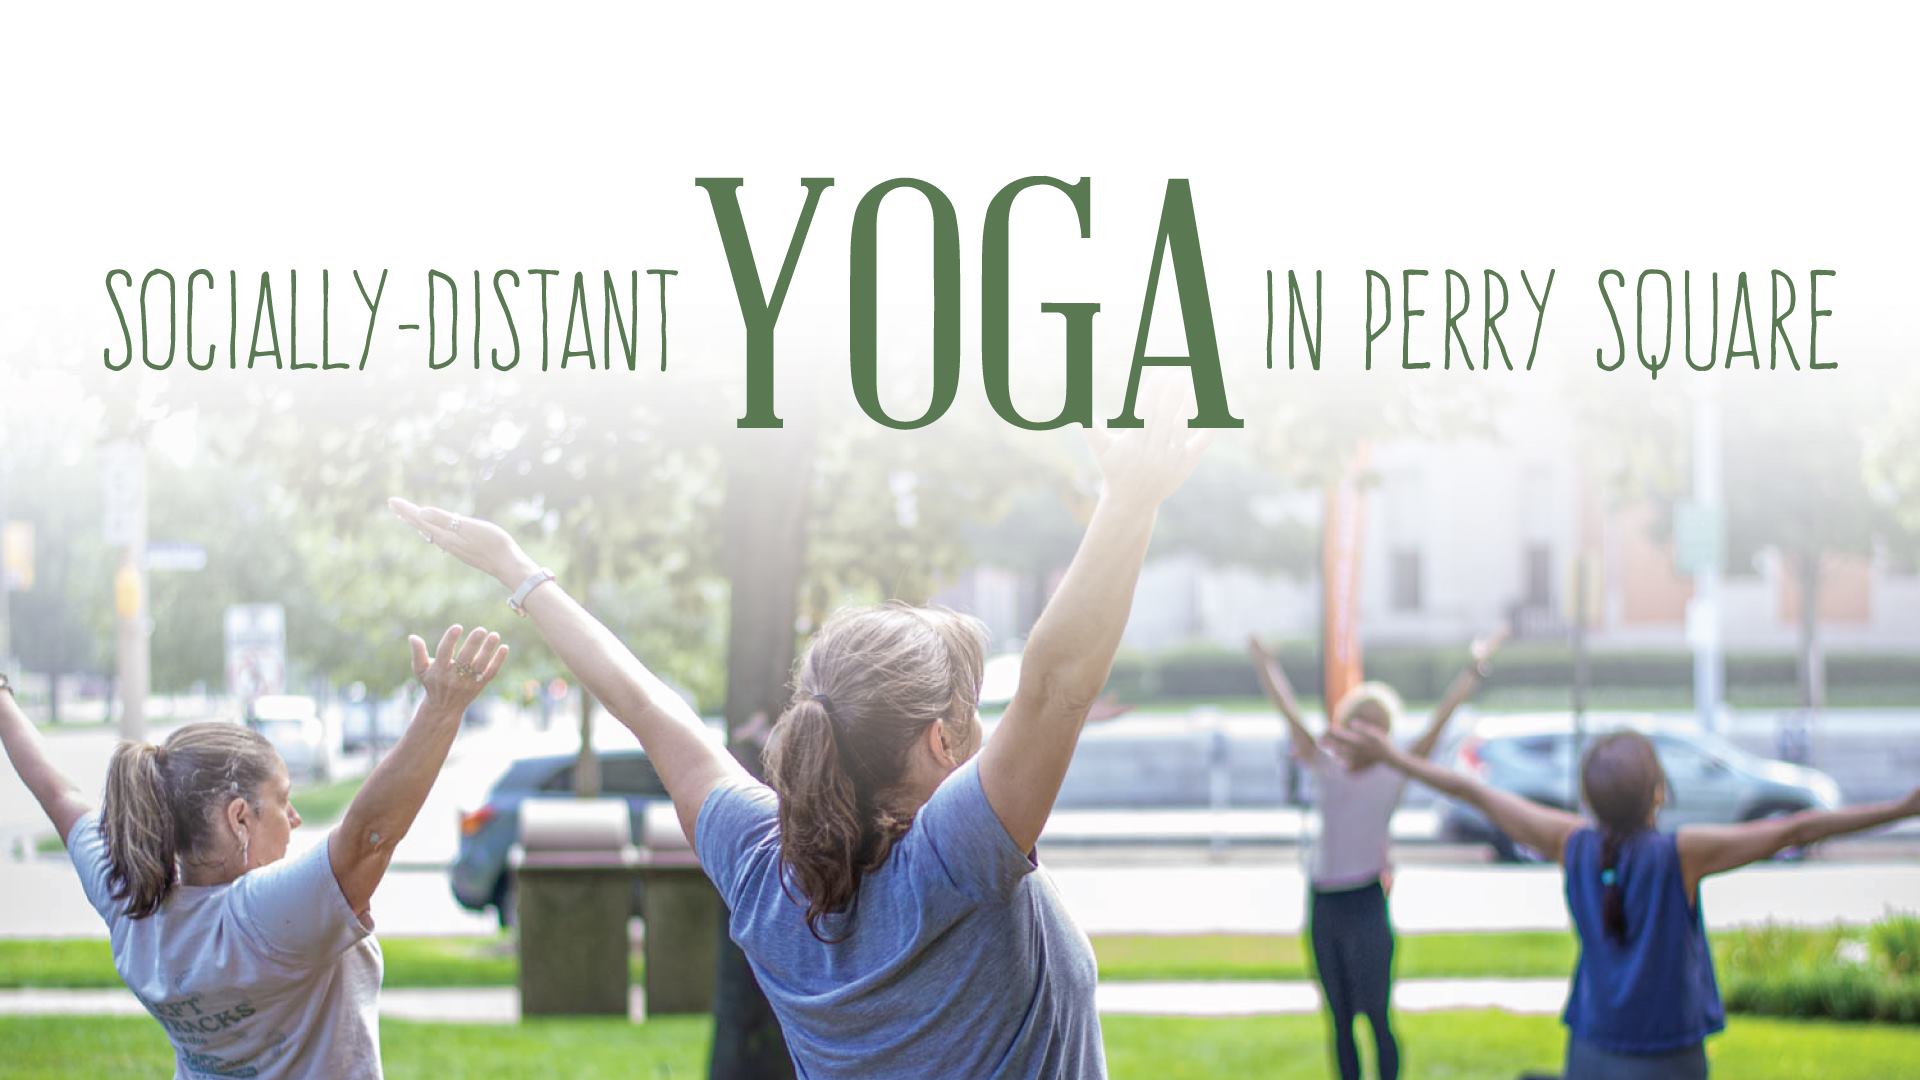 Wellness Wednesdays: Socially-Distant Yoga in Perry Square